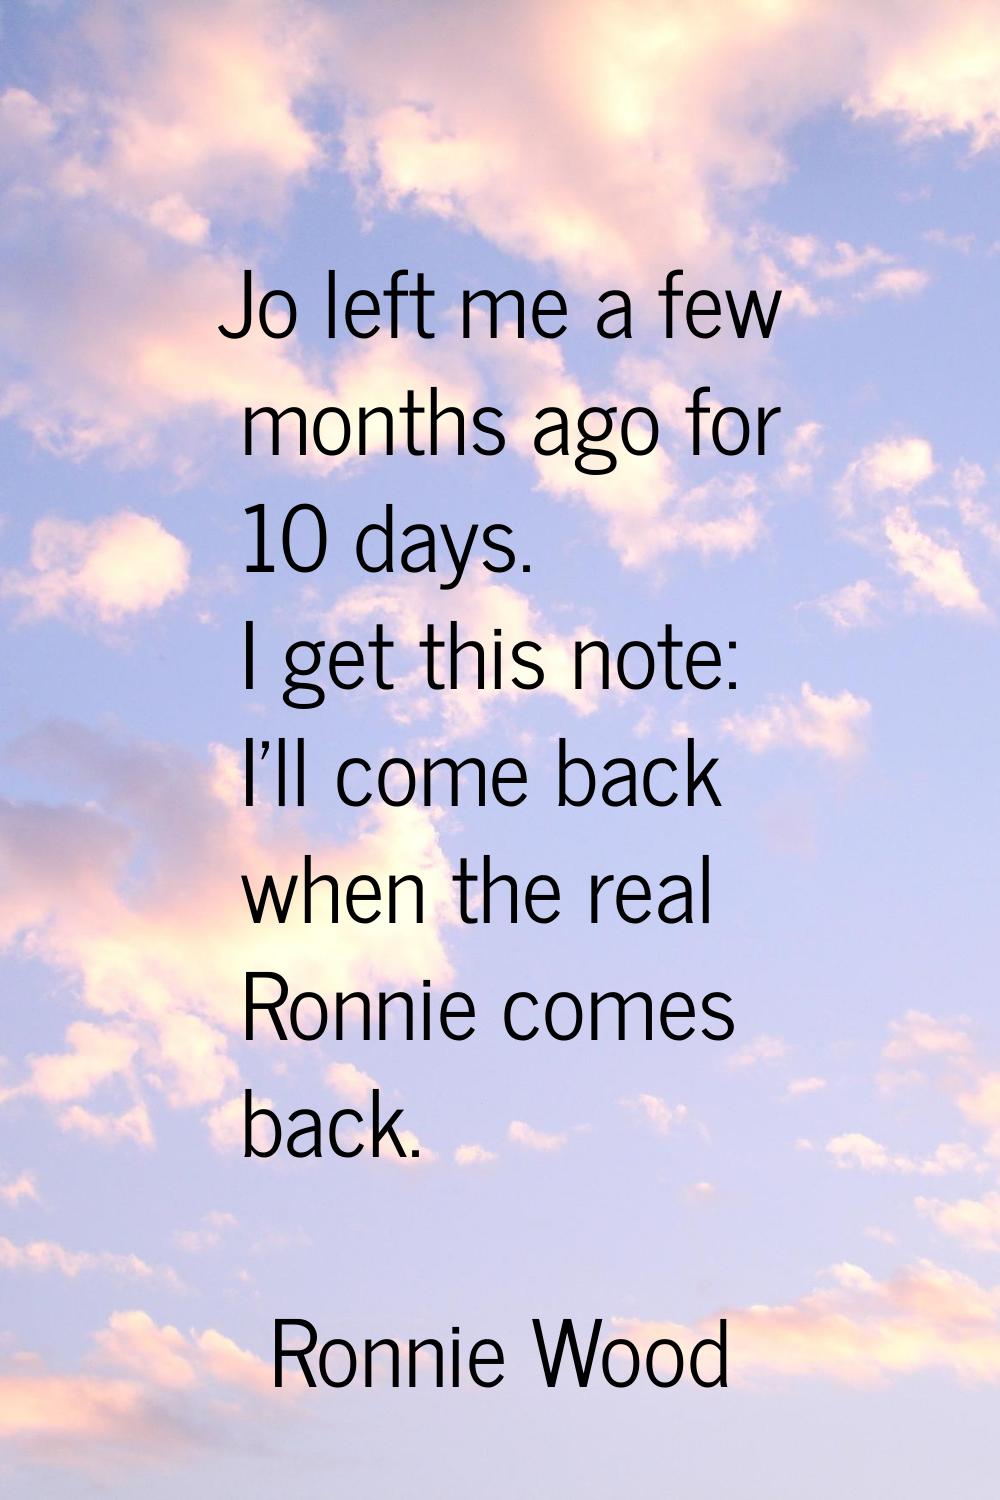 Jo left me a few months ago for 10 days. I get this note: I'll come back when the real Ronnie comes